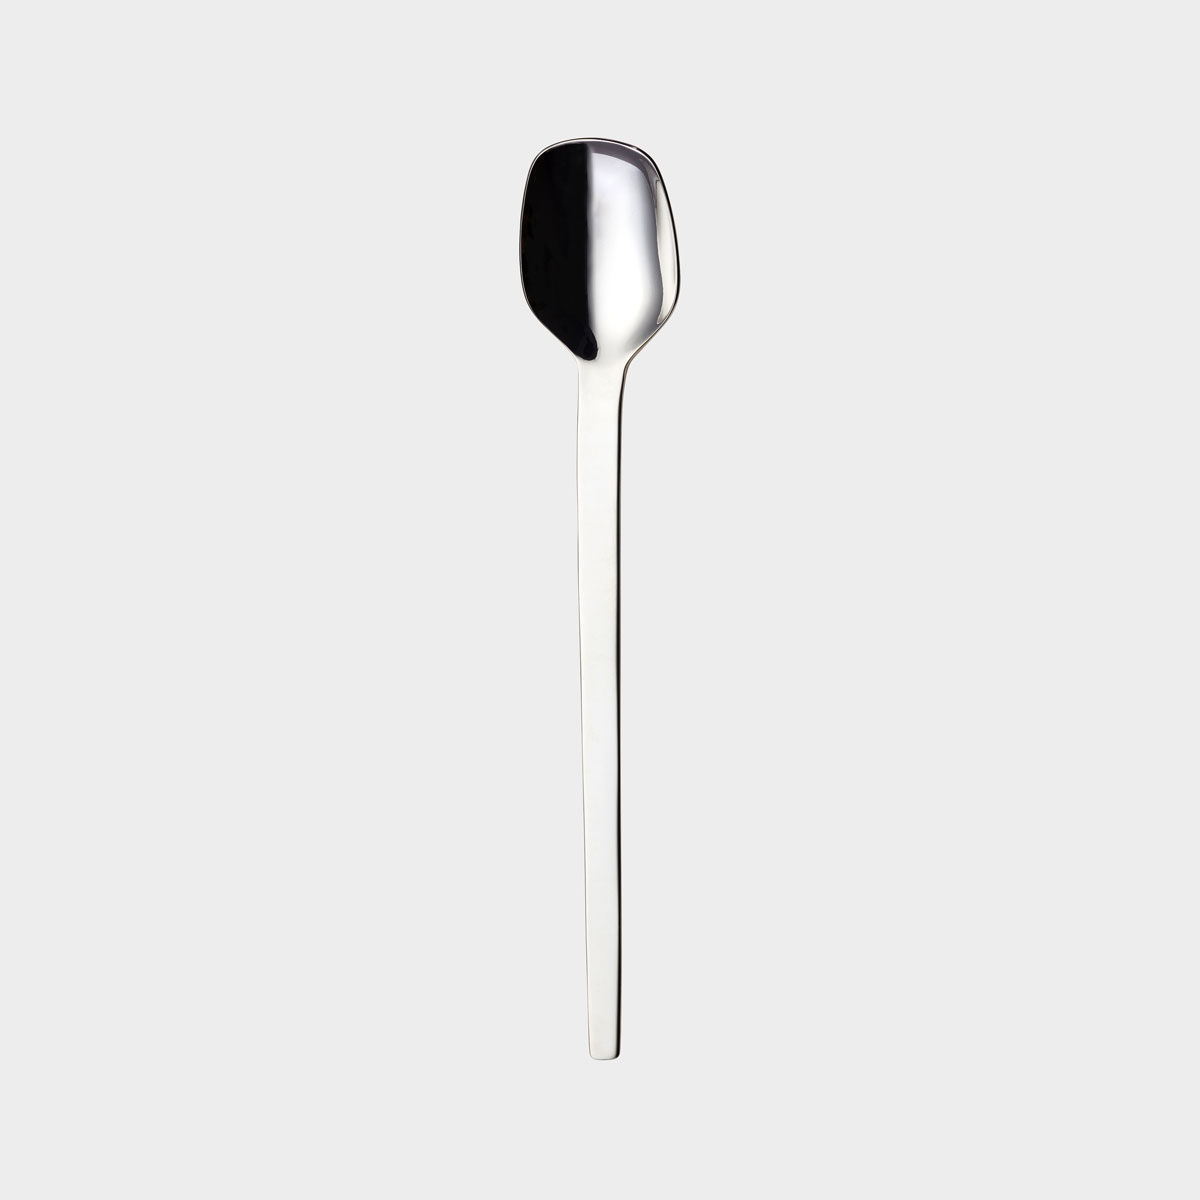 Tina serving spoon product image